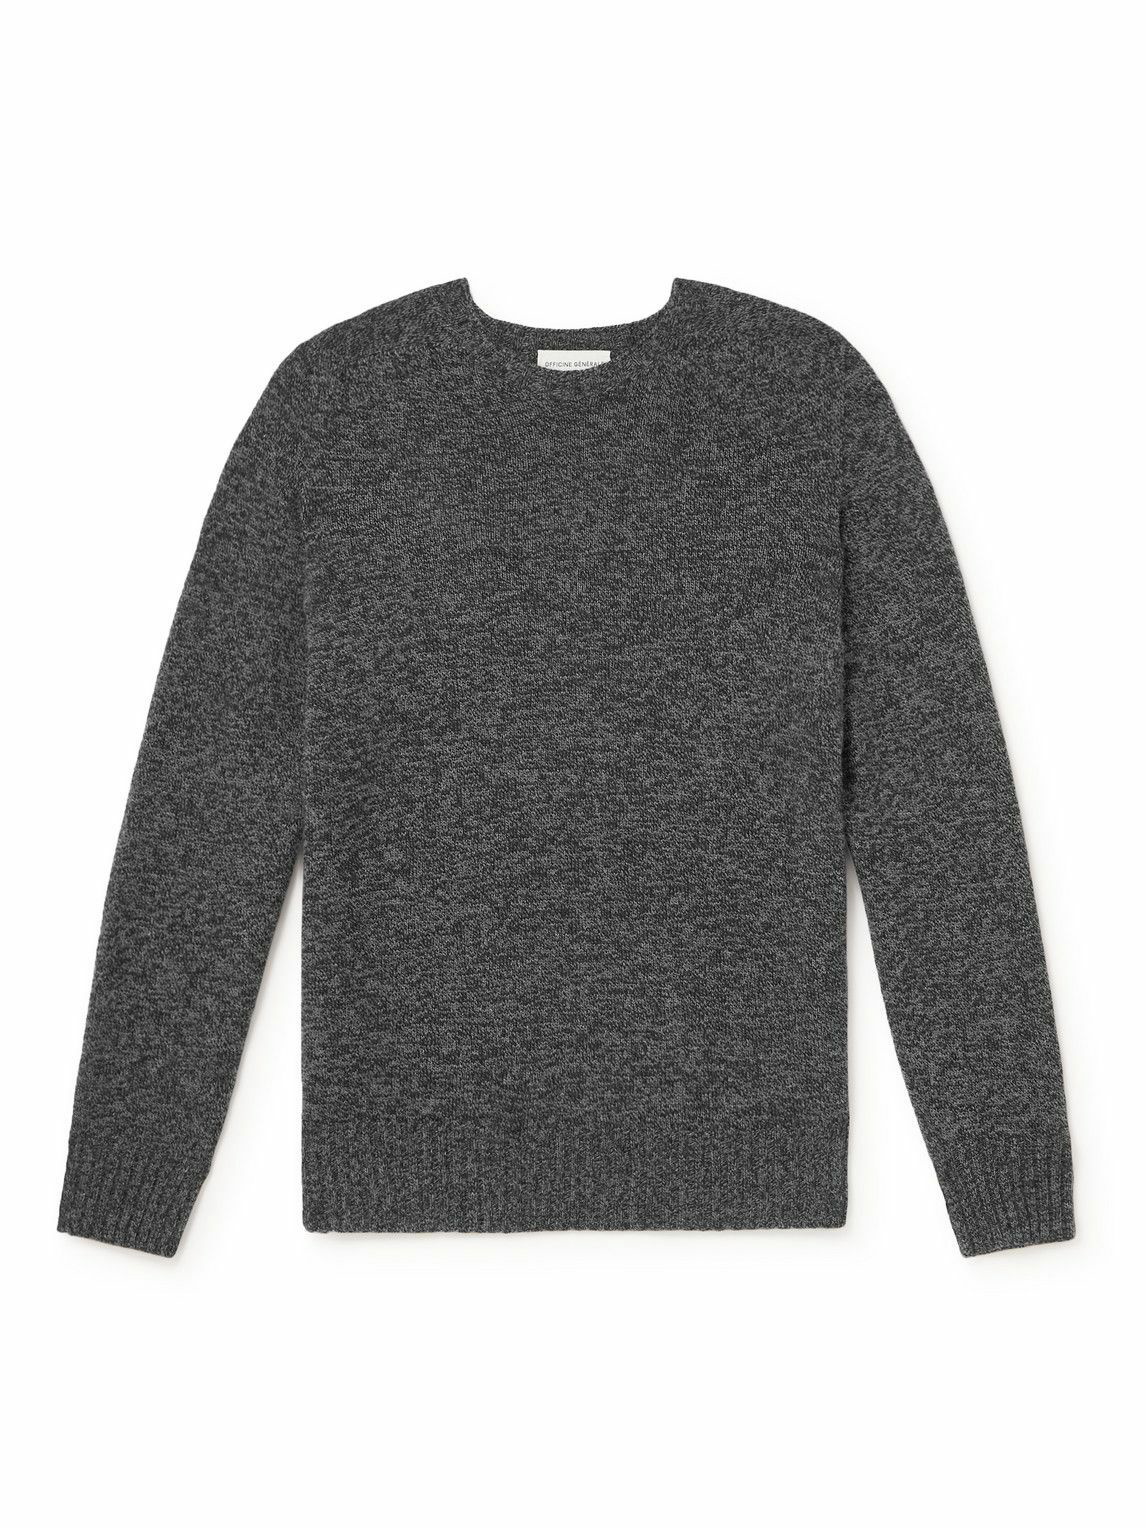 Officine Générale - Merino Wool and Cashmere-Blend Sweater - Gray ...